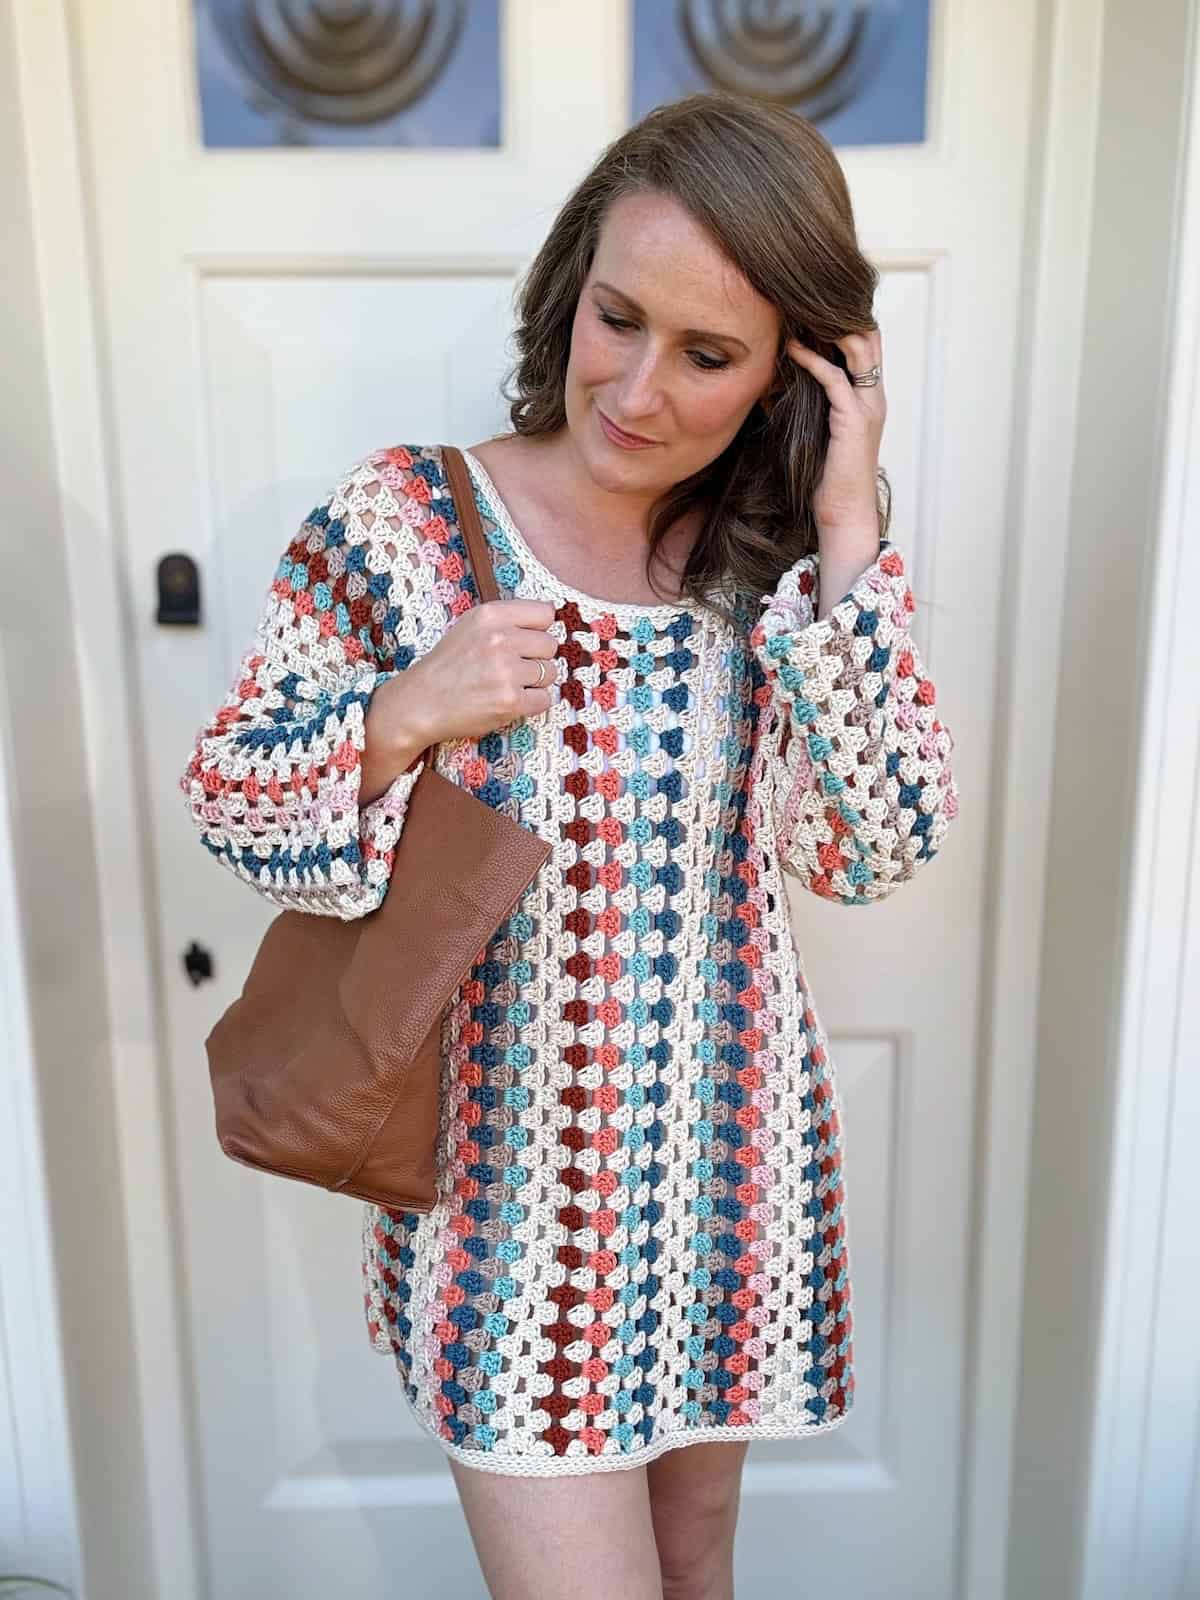 A person stands in front of a white door, wearing a colorful, crochet sweater dress and holding a brown leather bag over their shoulder.